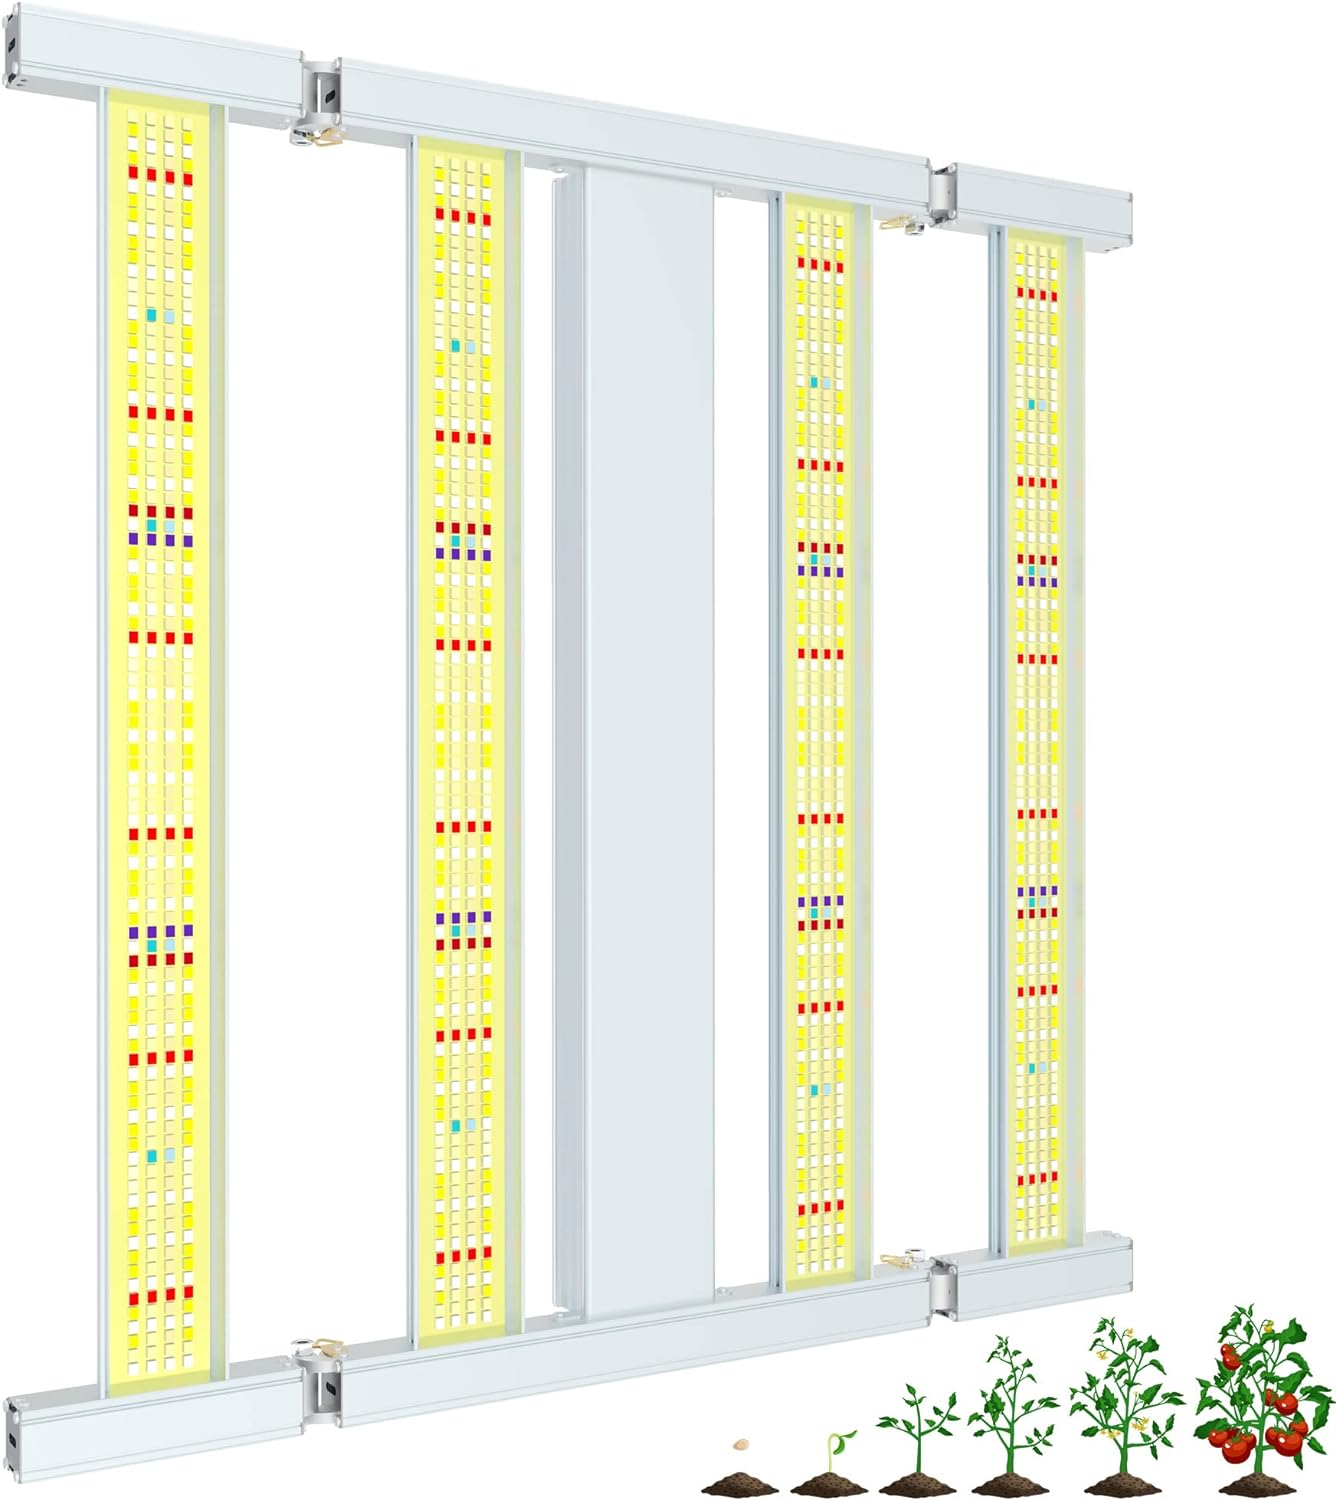 LED Grow Light S5000 Osram Diodes 6light Bars UPDAYDAY LED Grow Lamp Built-in15 Spectrum IncludeHPS CMH MH Sunlike Full Spectrum Dimmable Cover 5x5ft for Indoor Plants Greenhouse …